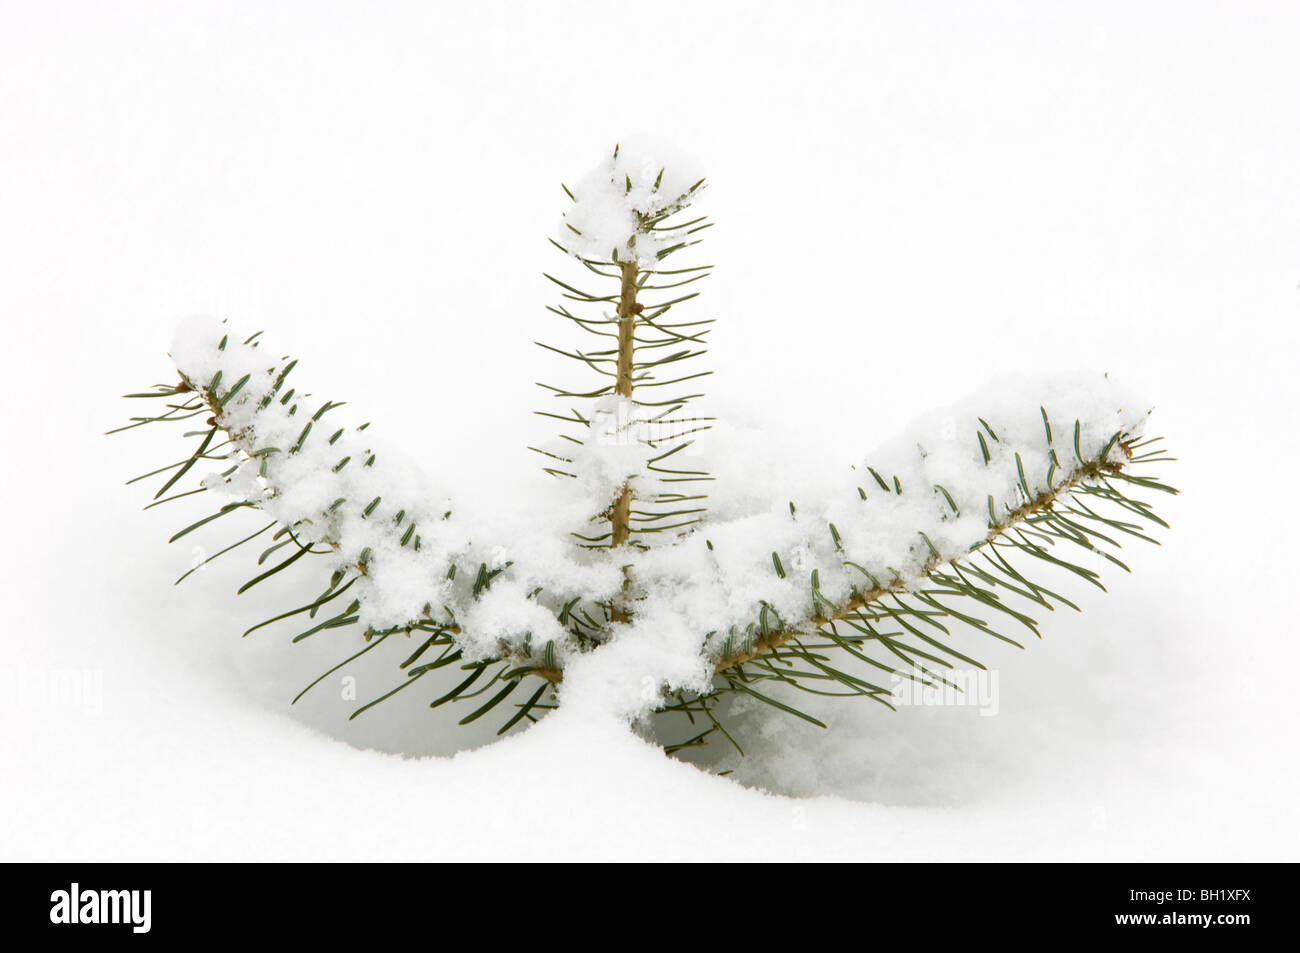 White spruce (Picea glauca) seedling branches with fresh snow, Greater Sudbury, Ontario, Canada Stock Photo